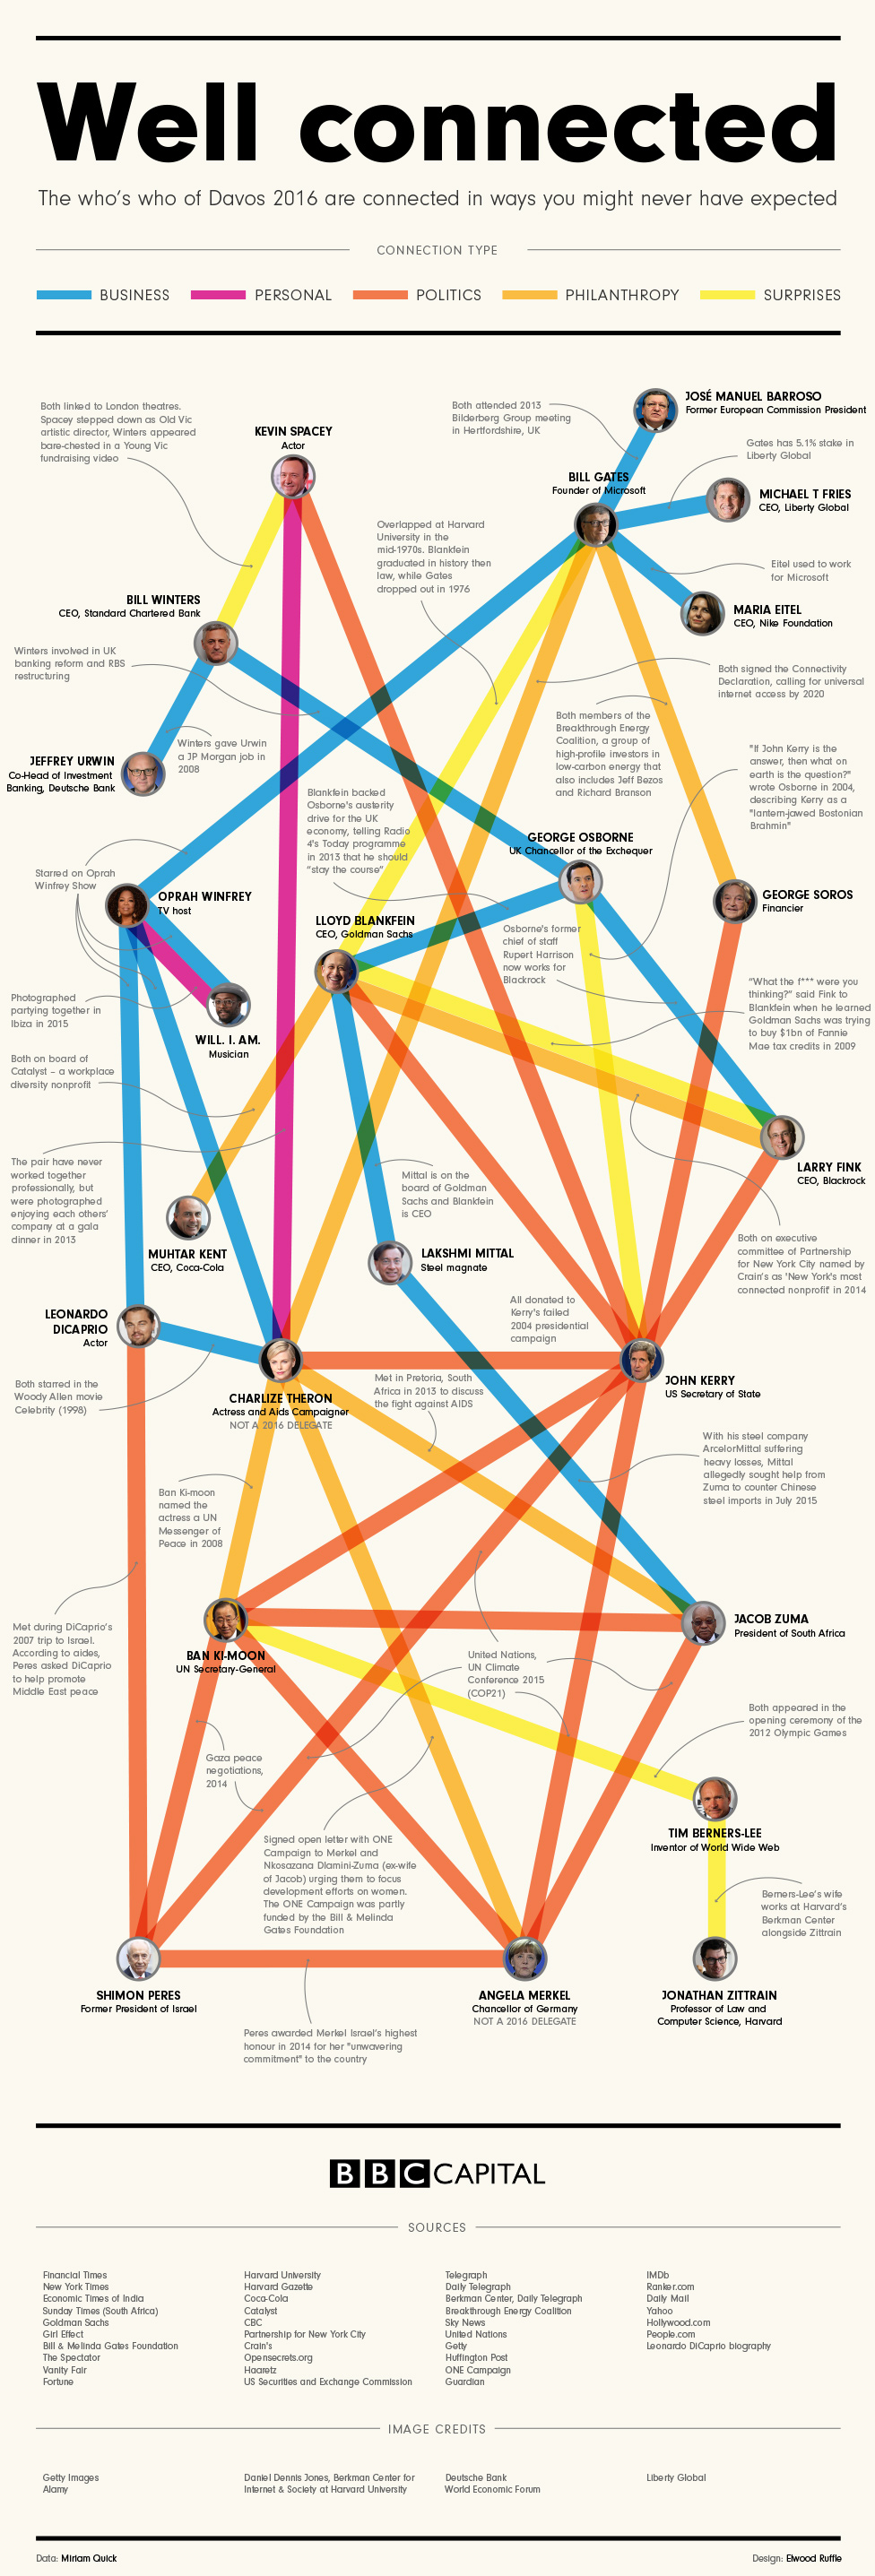 who-are-the-most-connected-at-davos